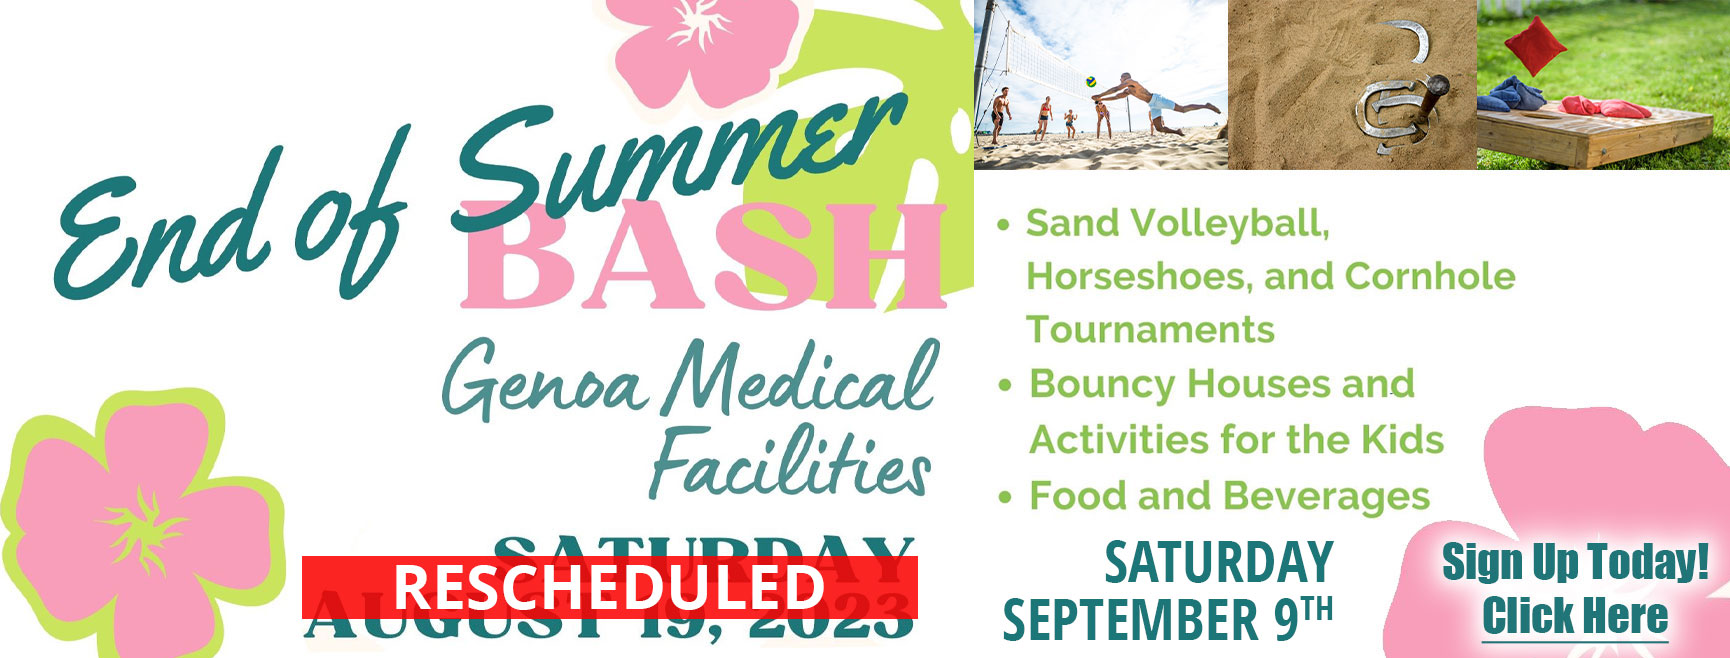 End of Summer Bash

Genoa Medical Facilities 
Save the Date
September 9, 2023
Sand Volleyball, Horseshoes,
& Cornhole Tournaments
Bouncy Houses & Activities
for the kids
Food & Beverages